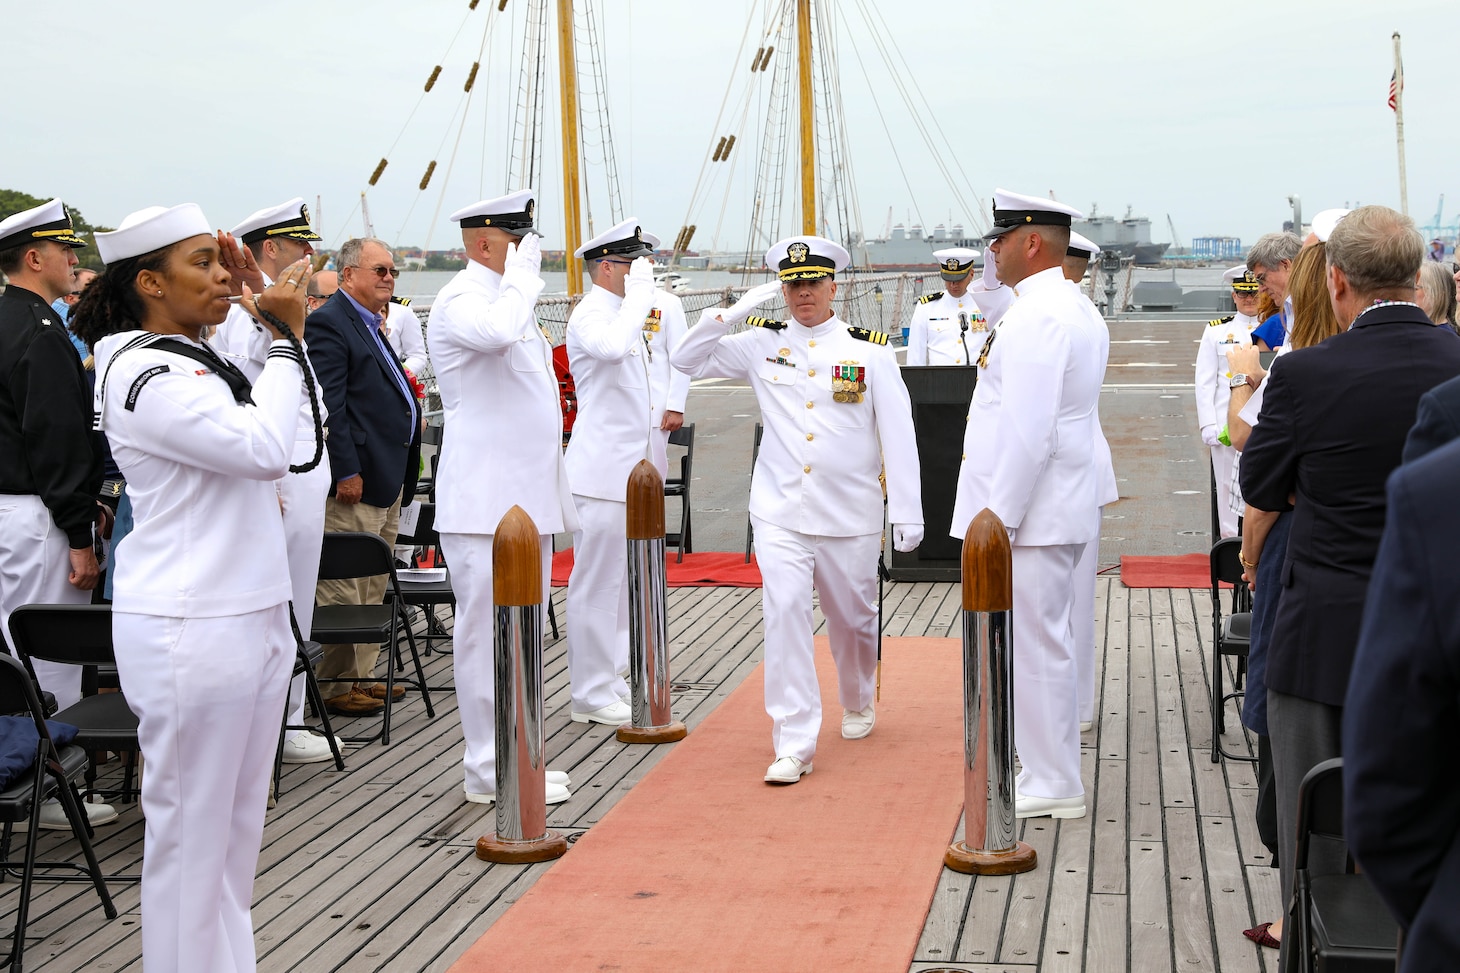 Cmdr. Chris Turner renders a salute to sideboys during a change of command ceremony for the Virginia-class attack submarine USS John Warner (SSN 785) aboard the decommissioned Iowa-class battleship USS Wisconsin.